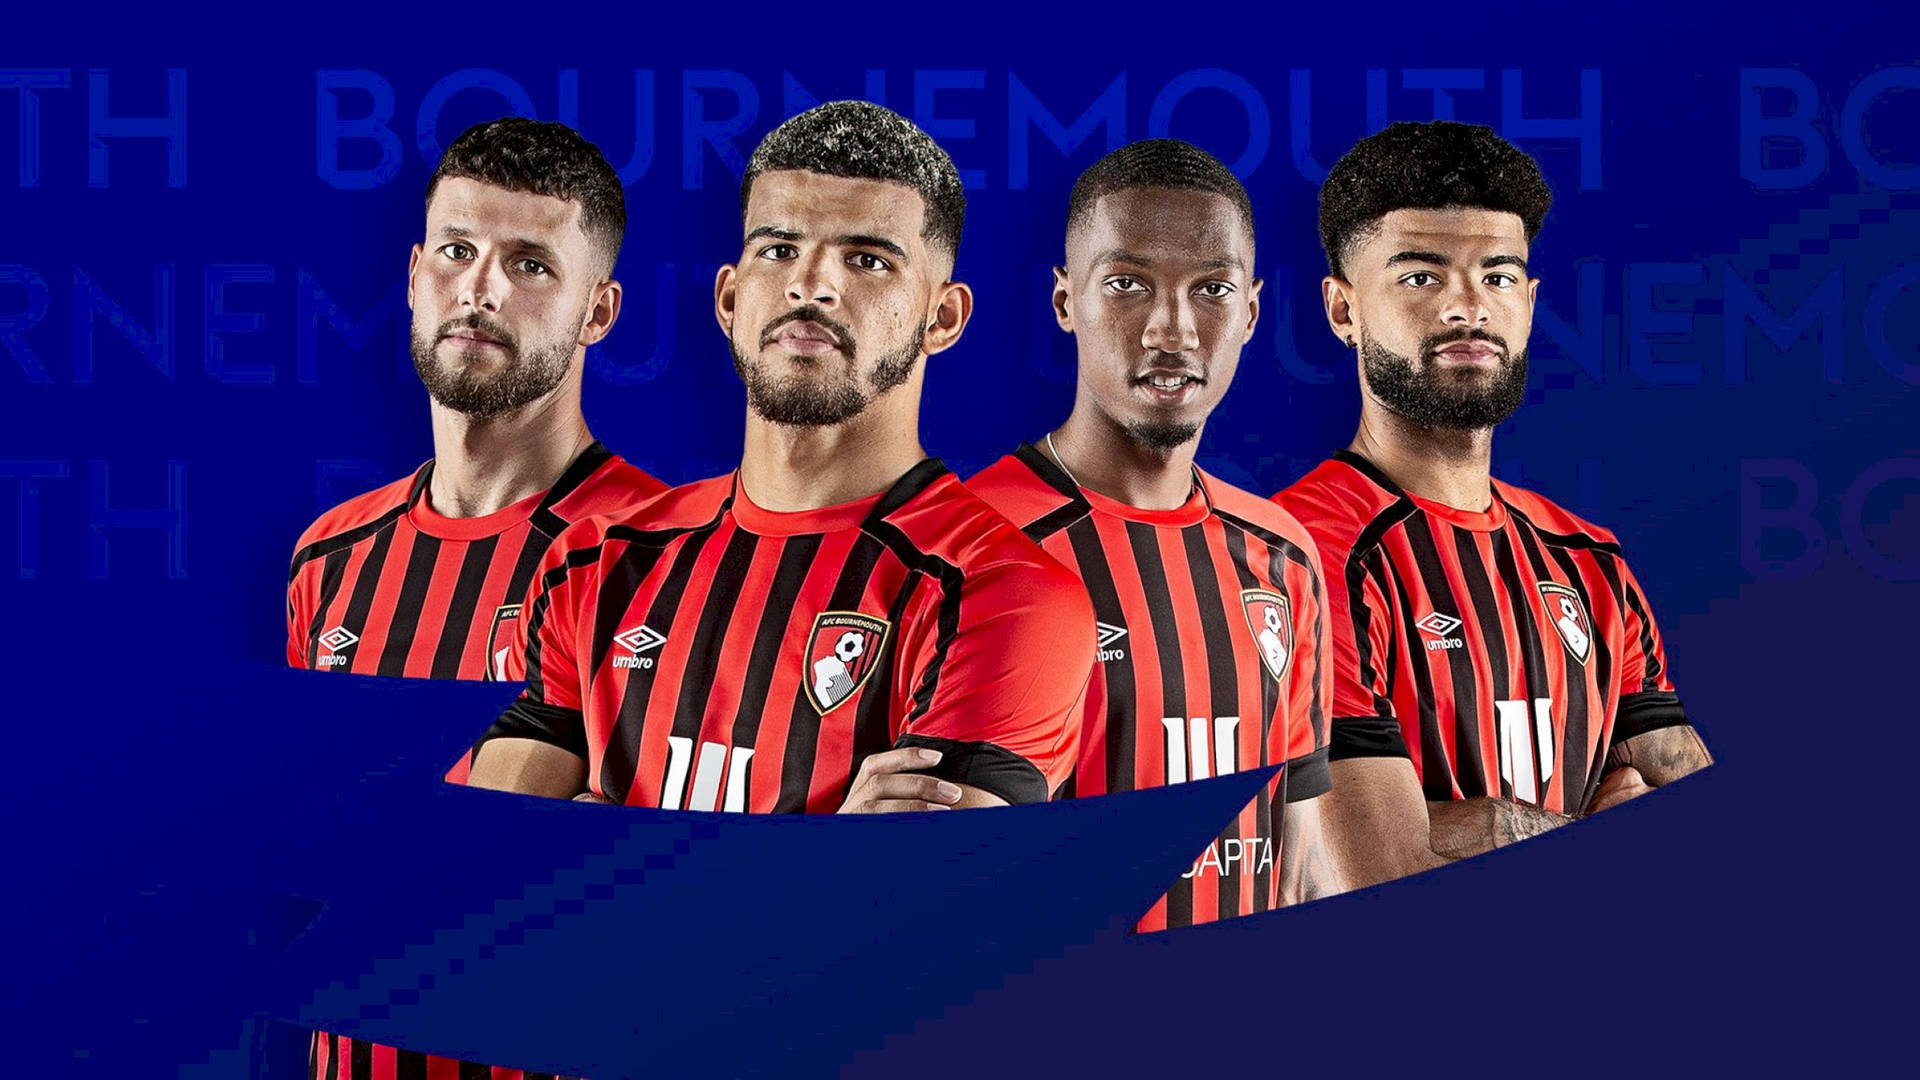 AFC Bournemouth Players On Blue Background Wallpaper